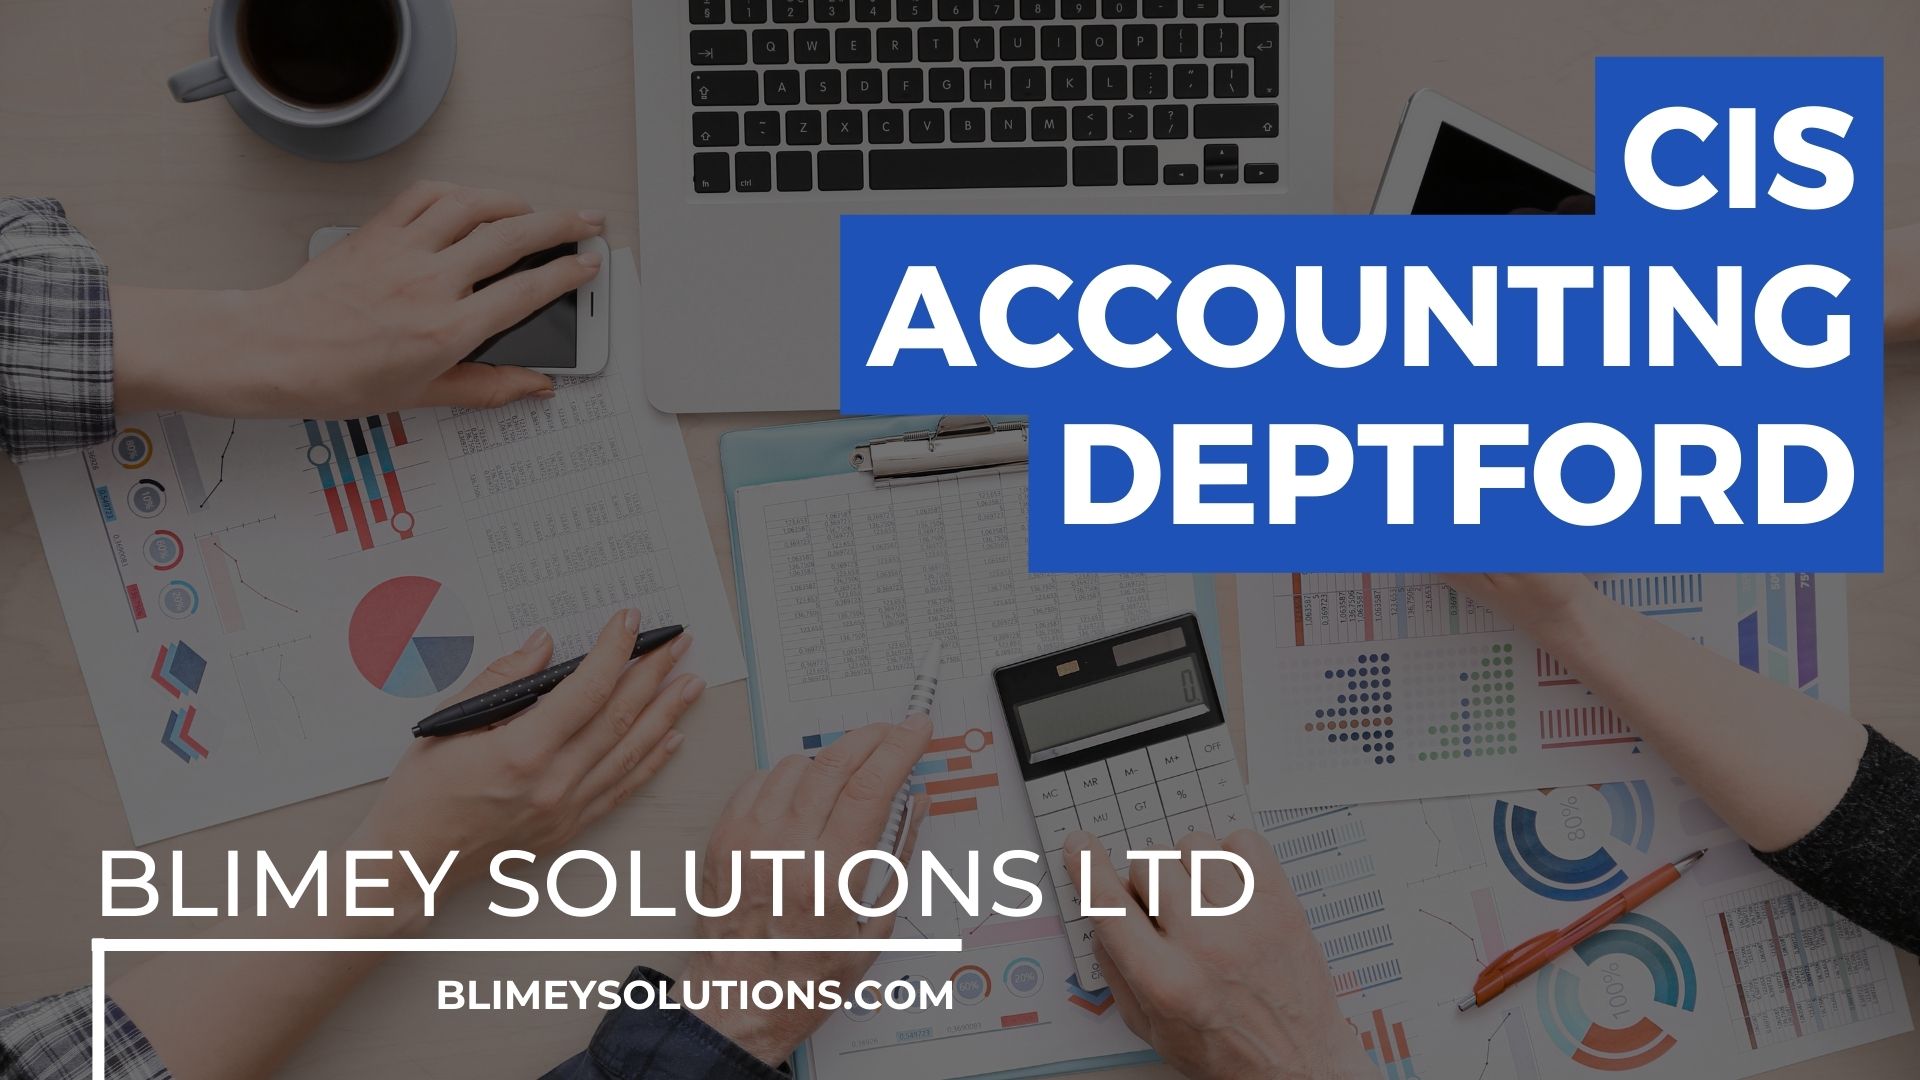 CIS Accounting in Deptford SE8 London